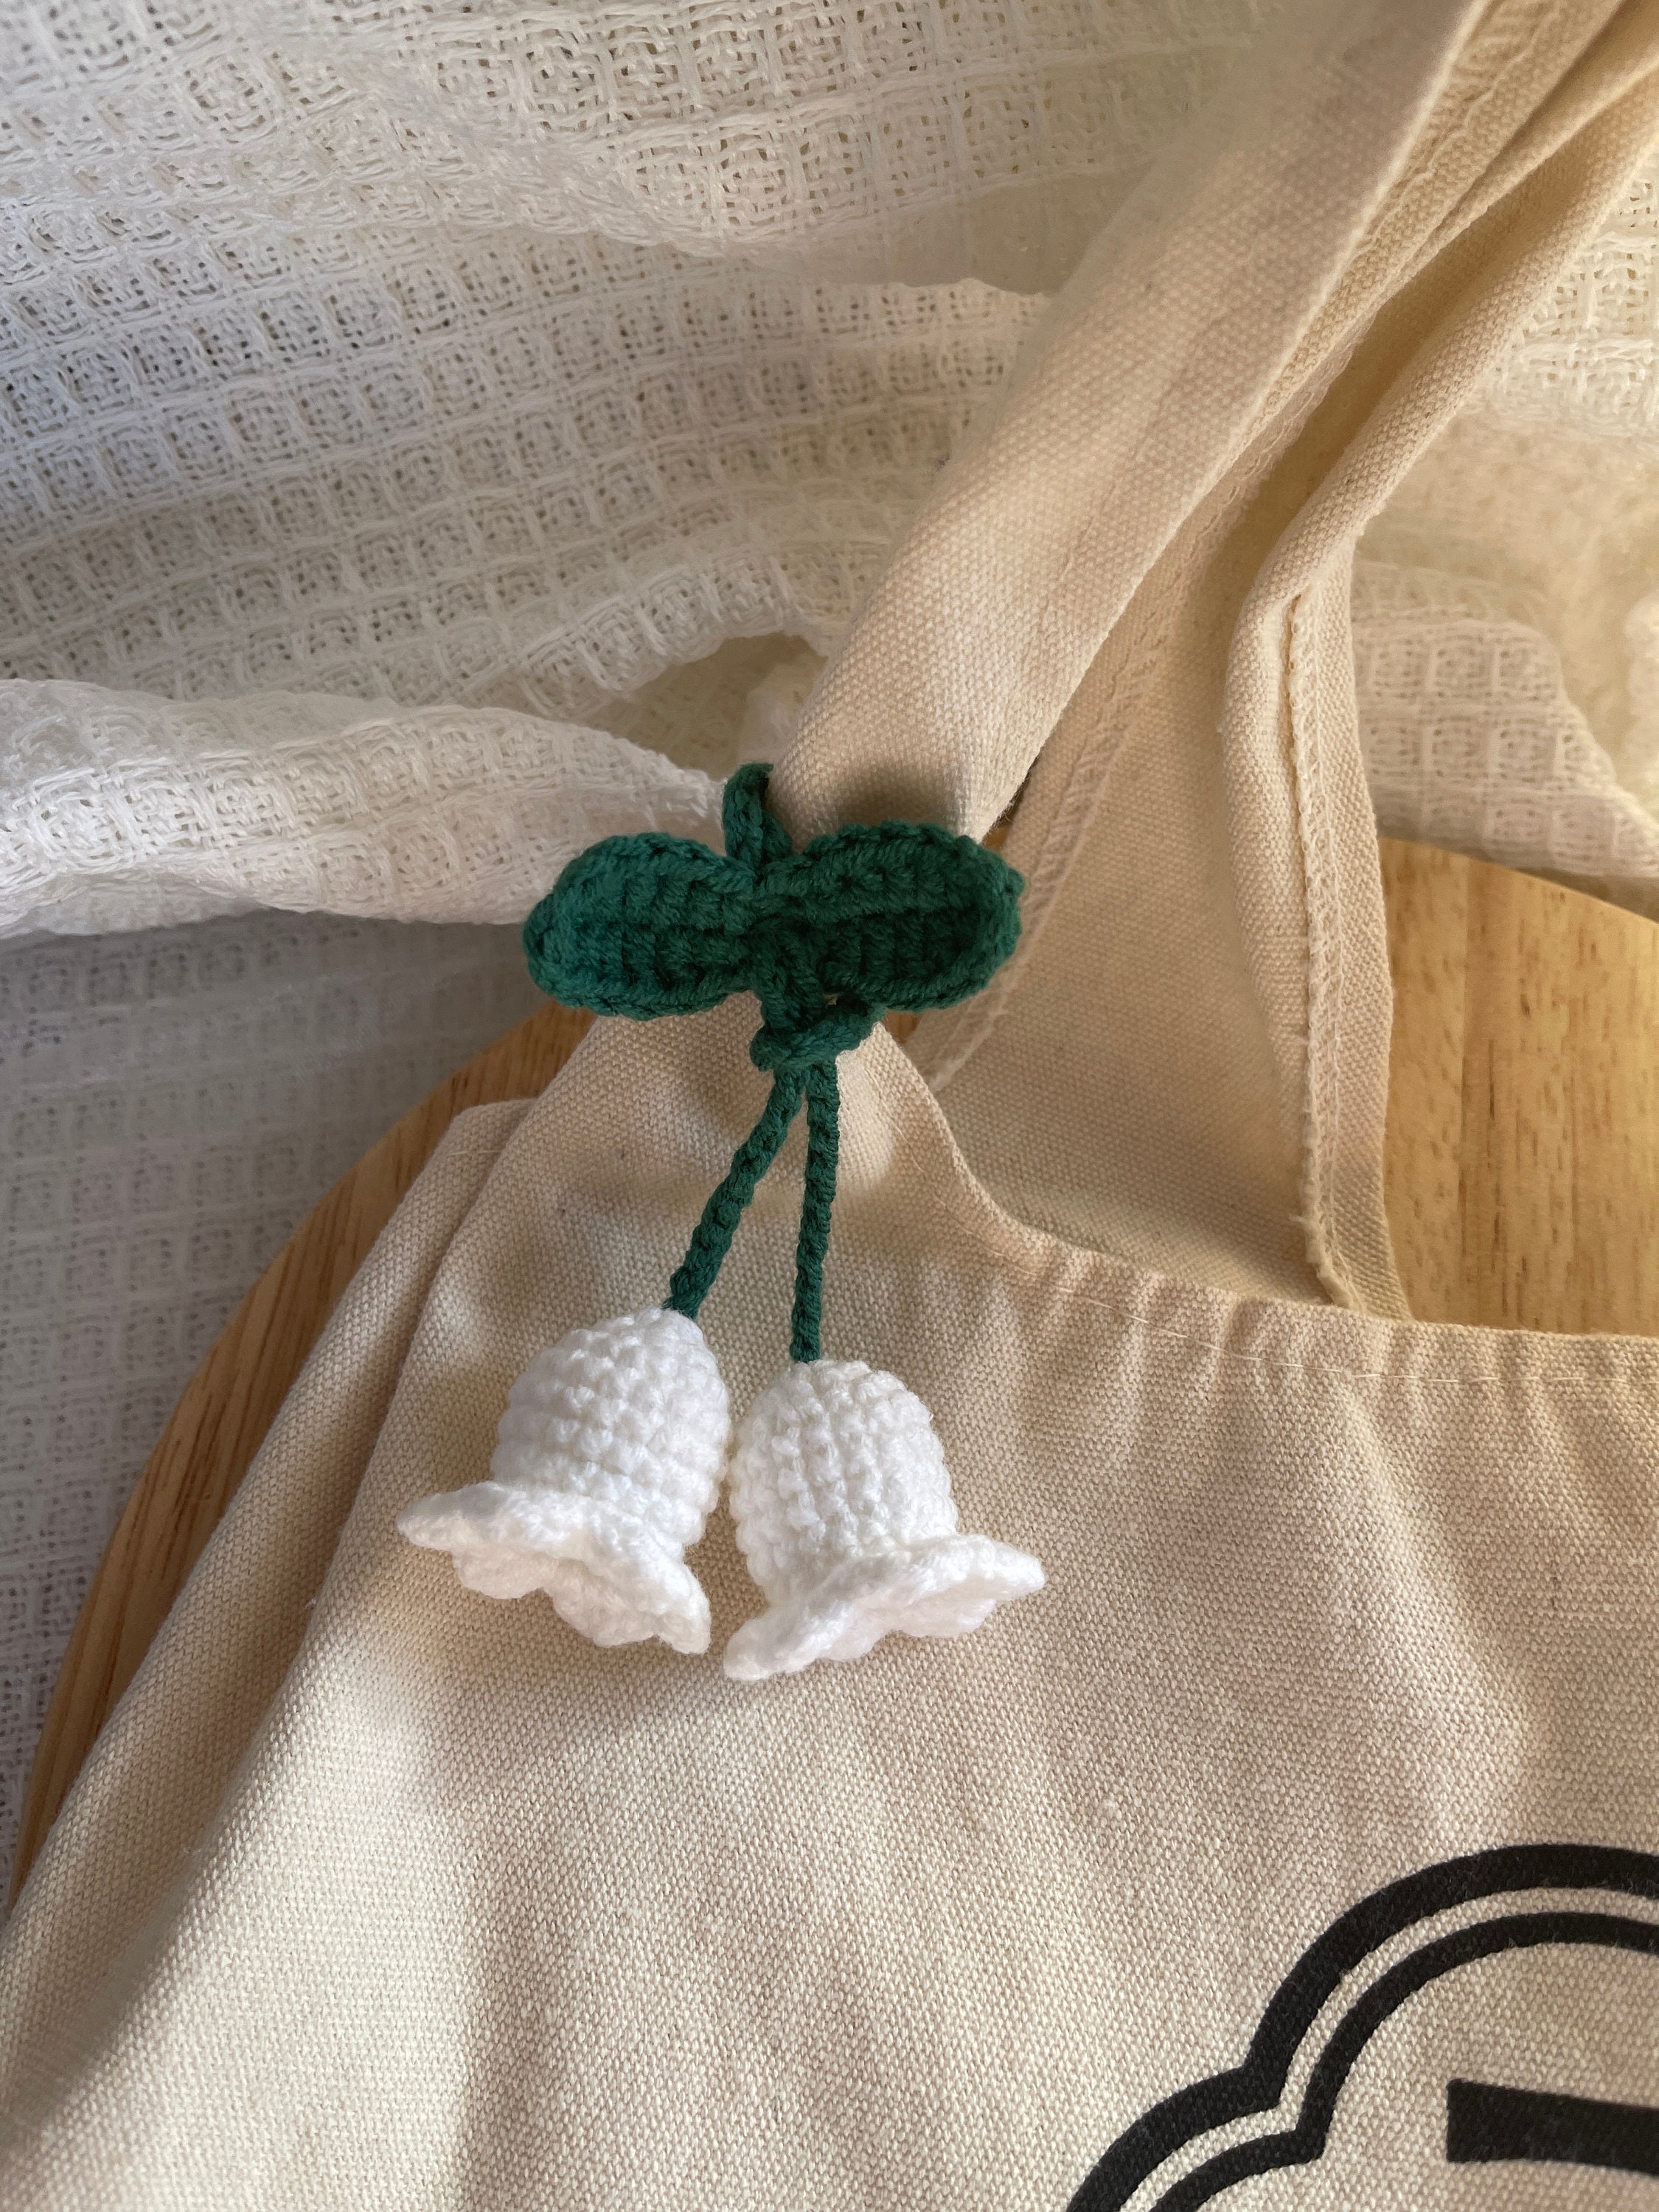 UBUTERFLY Crochet Lily of The Valley Flowers Keychain May Birth Flowers Car Mirror Hanging Decor Keyring Key